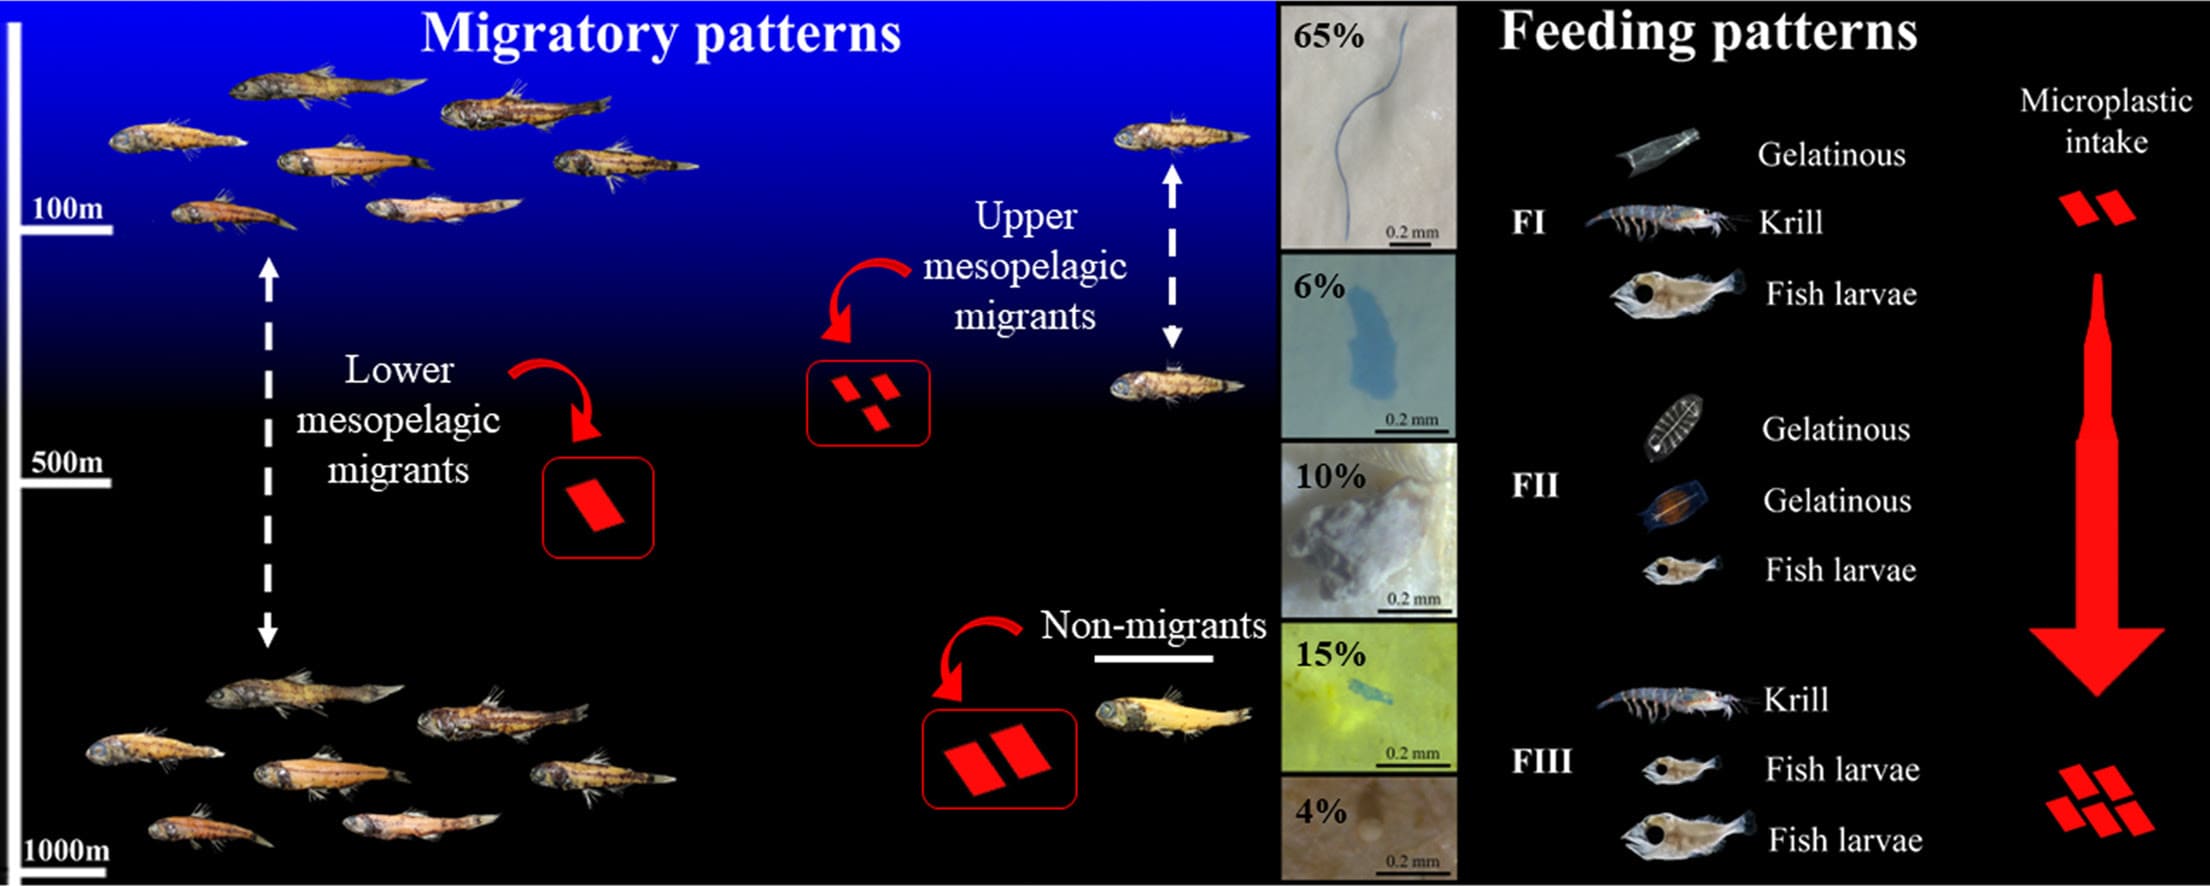 Influencing factors for microplastic intake in abundant deep-sea lanternfishes (Myctophidae)